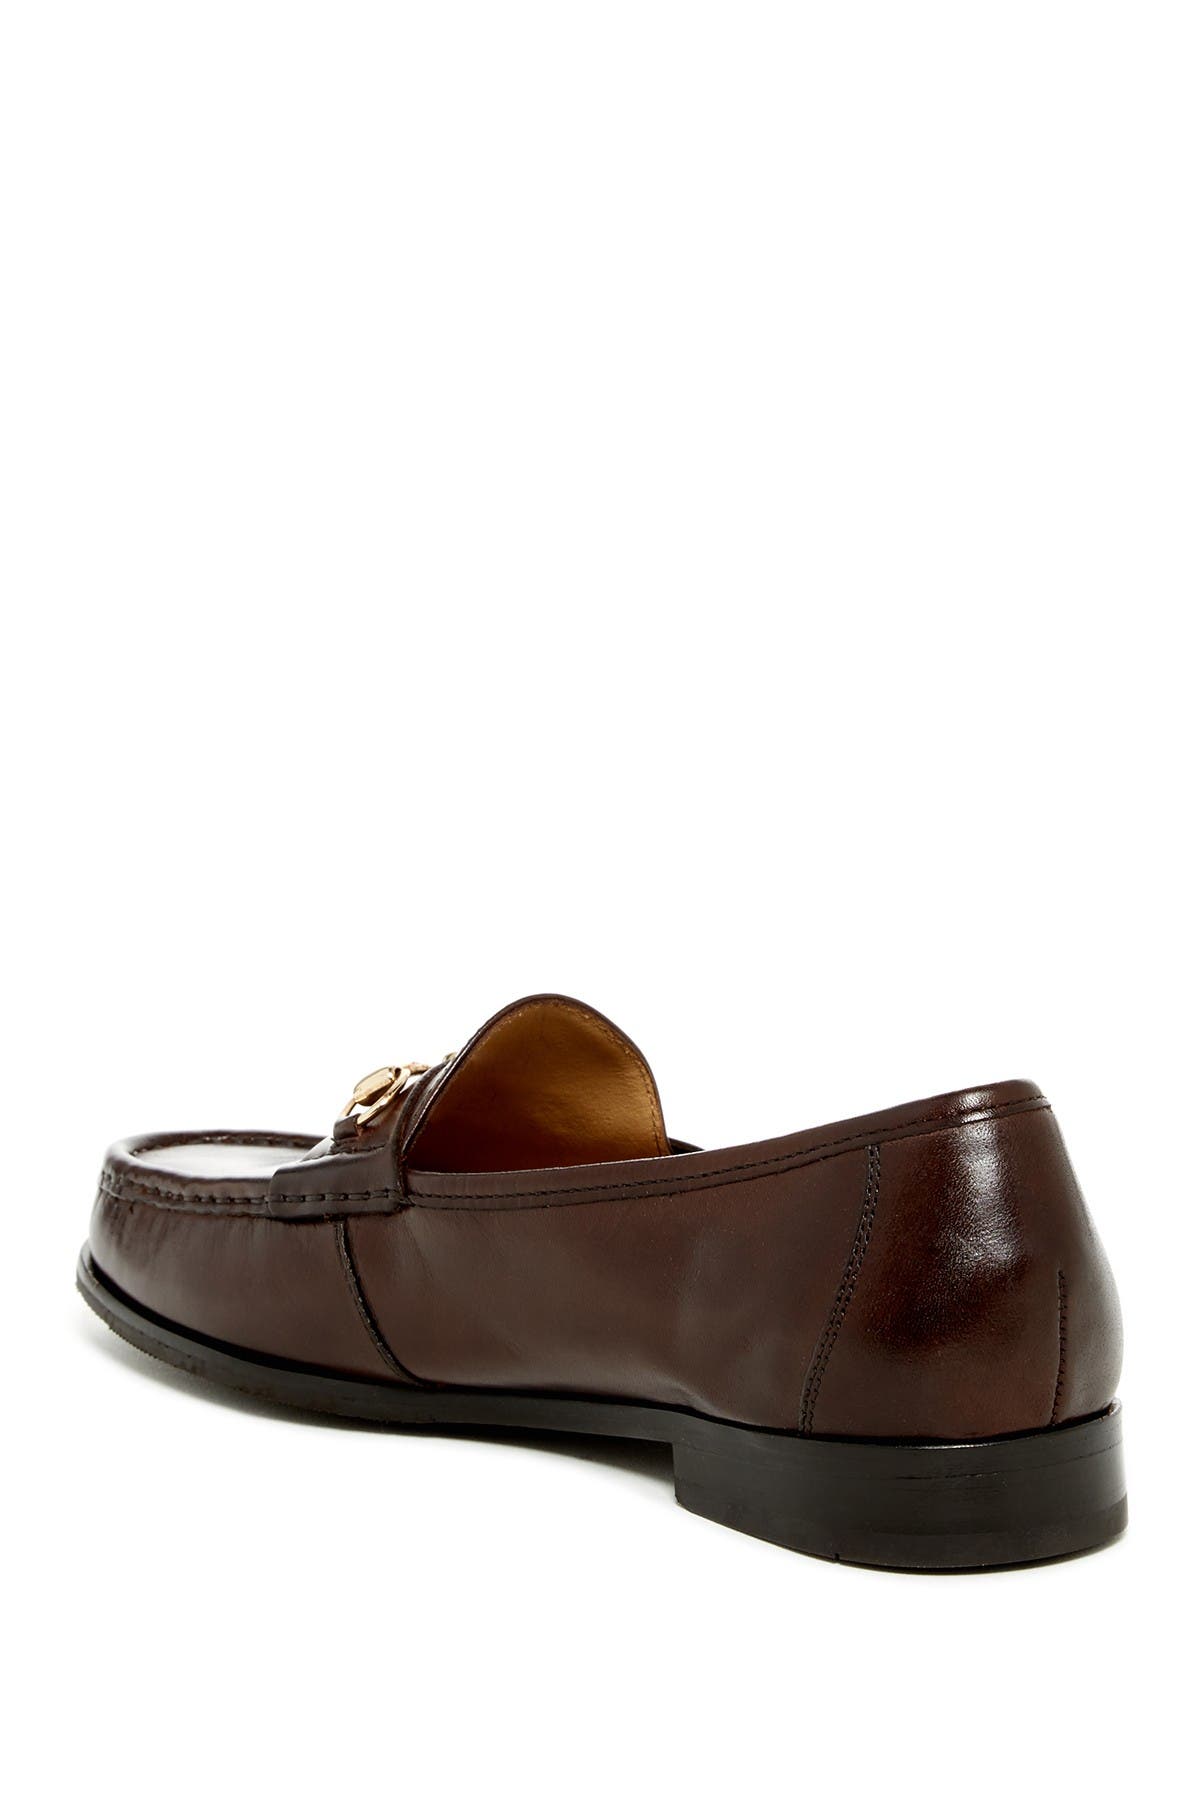 cole haan ascot loafer